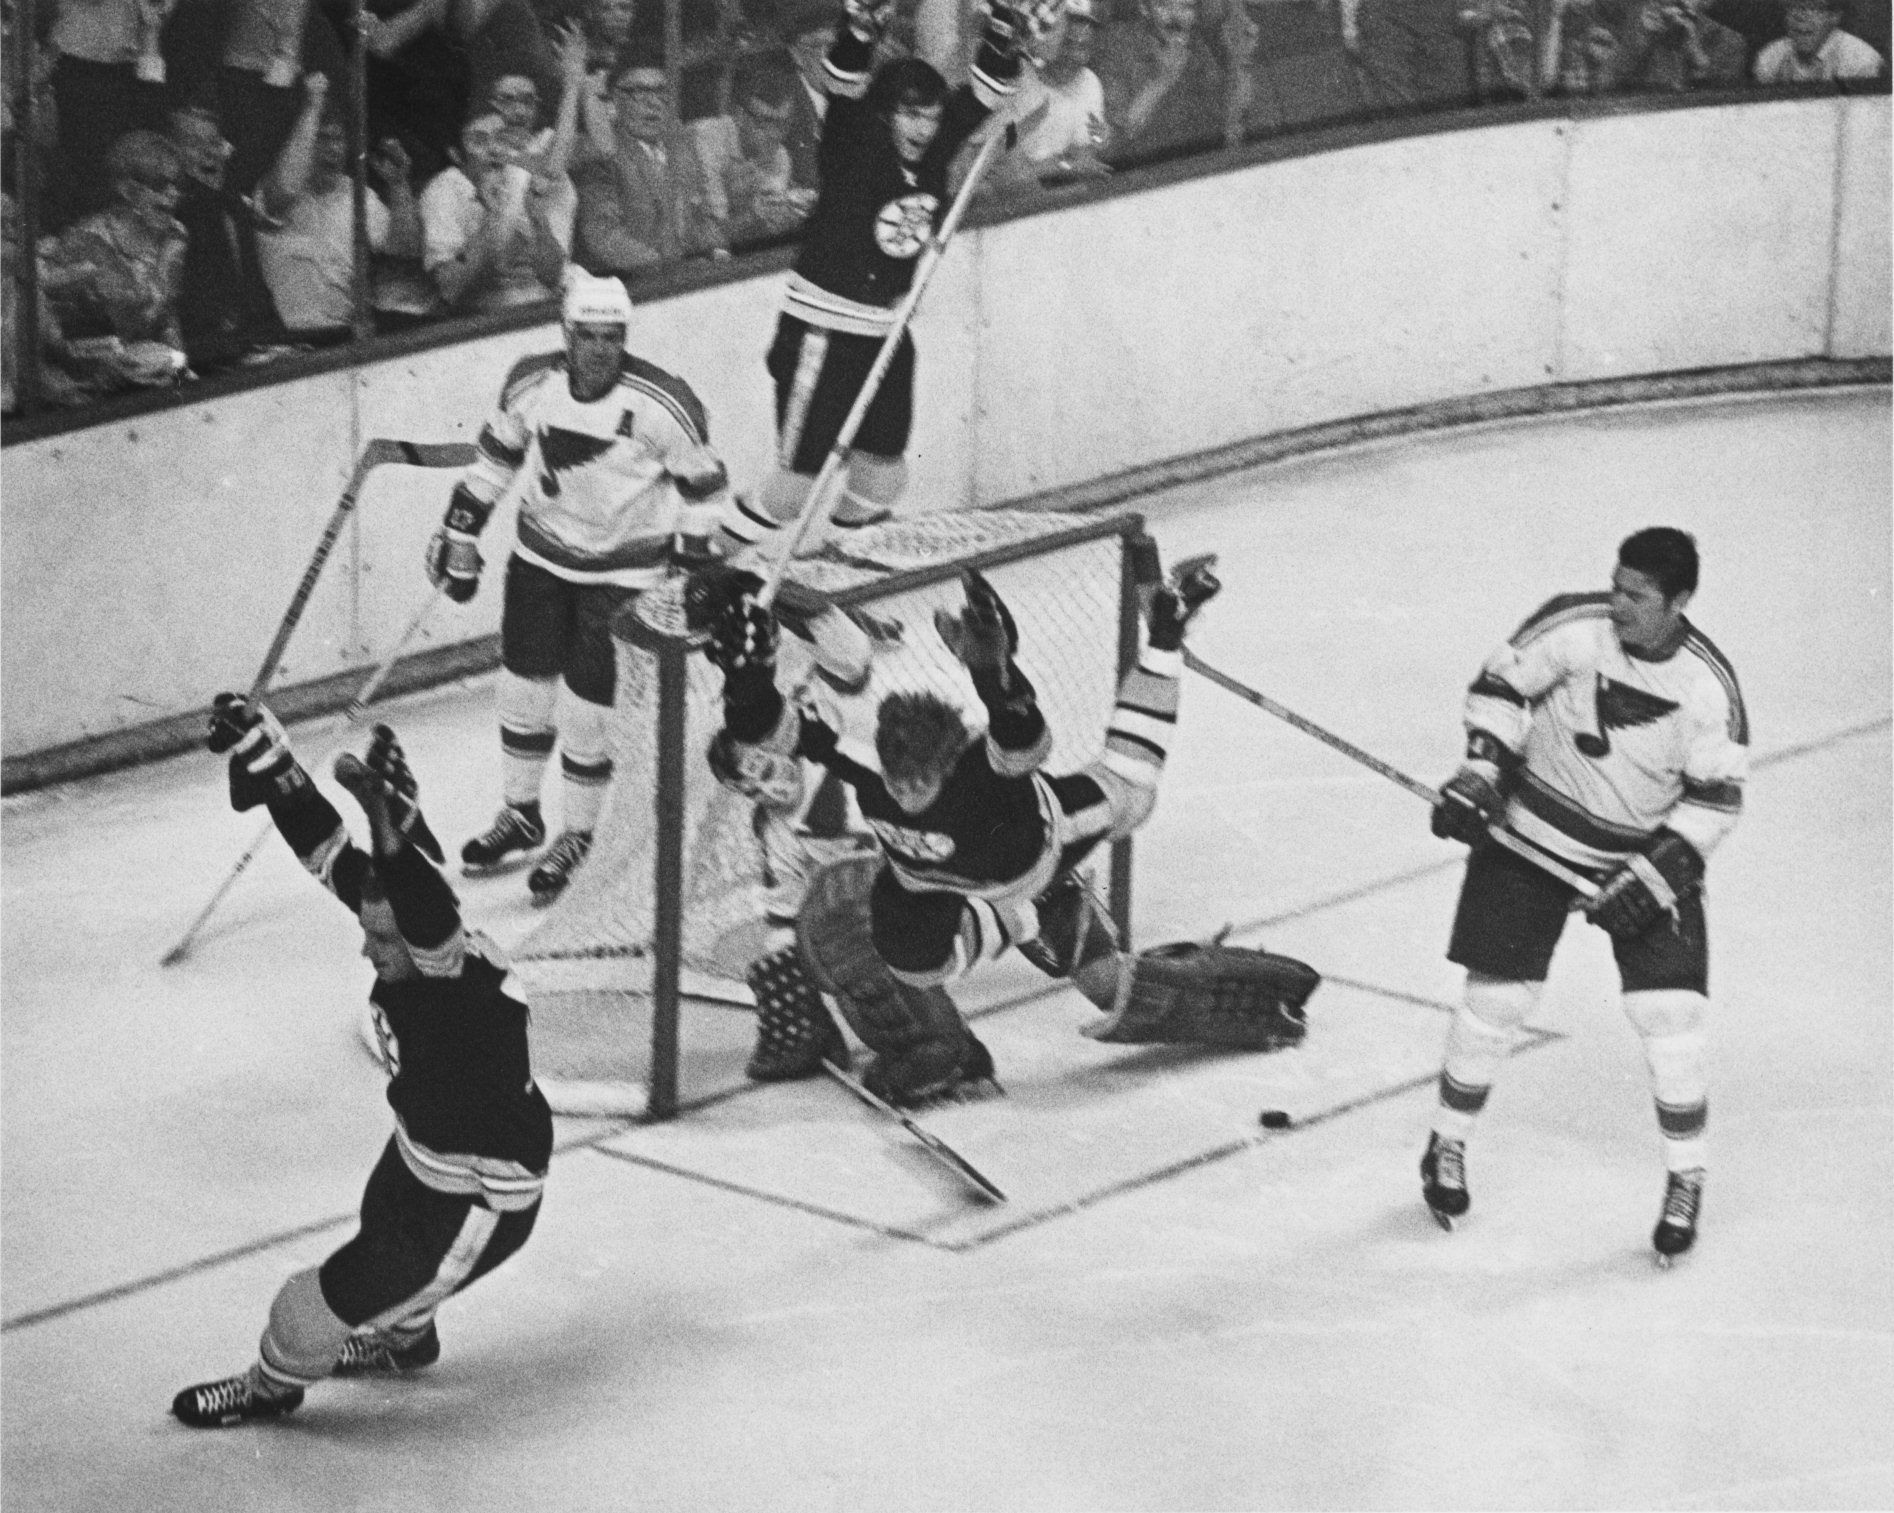 1972 Hockey Summit: 50 years ago a single goal brought Canadians together  in a moment of perfect joy